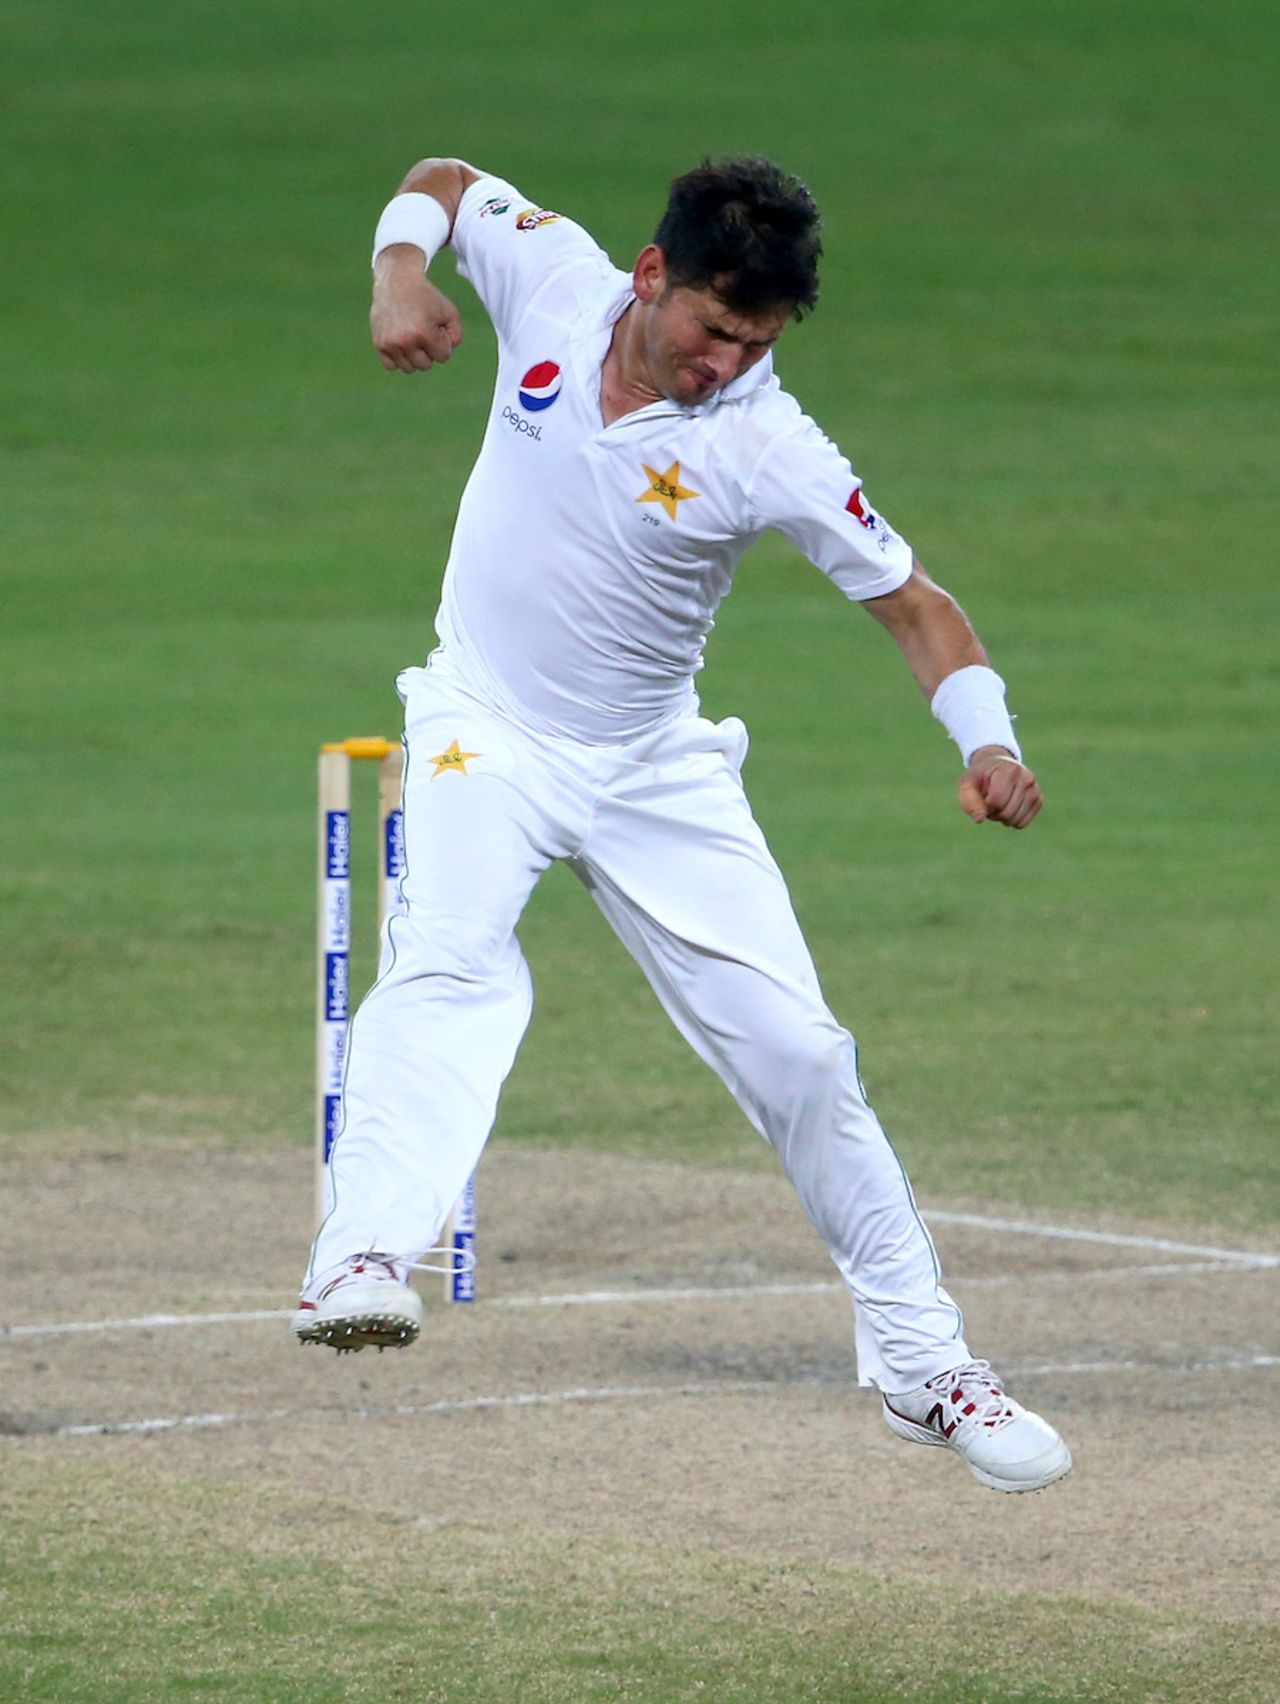 Yasir Shah is thrilled after dismissing Roston Chase, Pakistan v West Indies, 1st Test, Dubai, 5th day, October 17, 2016